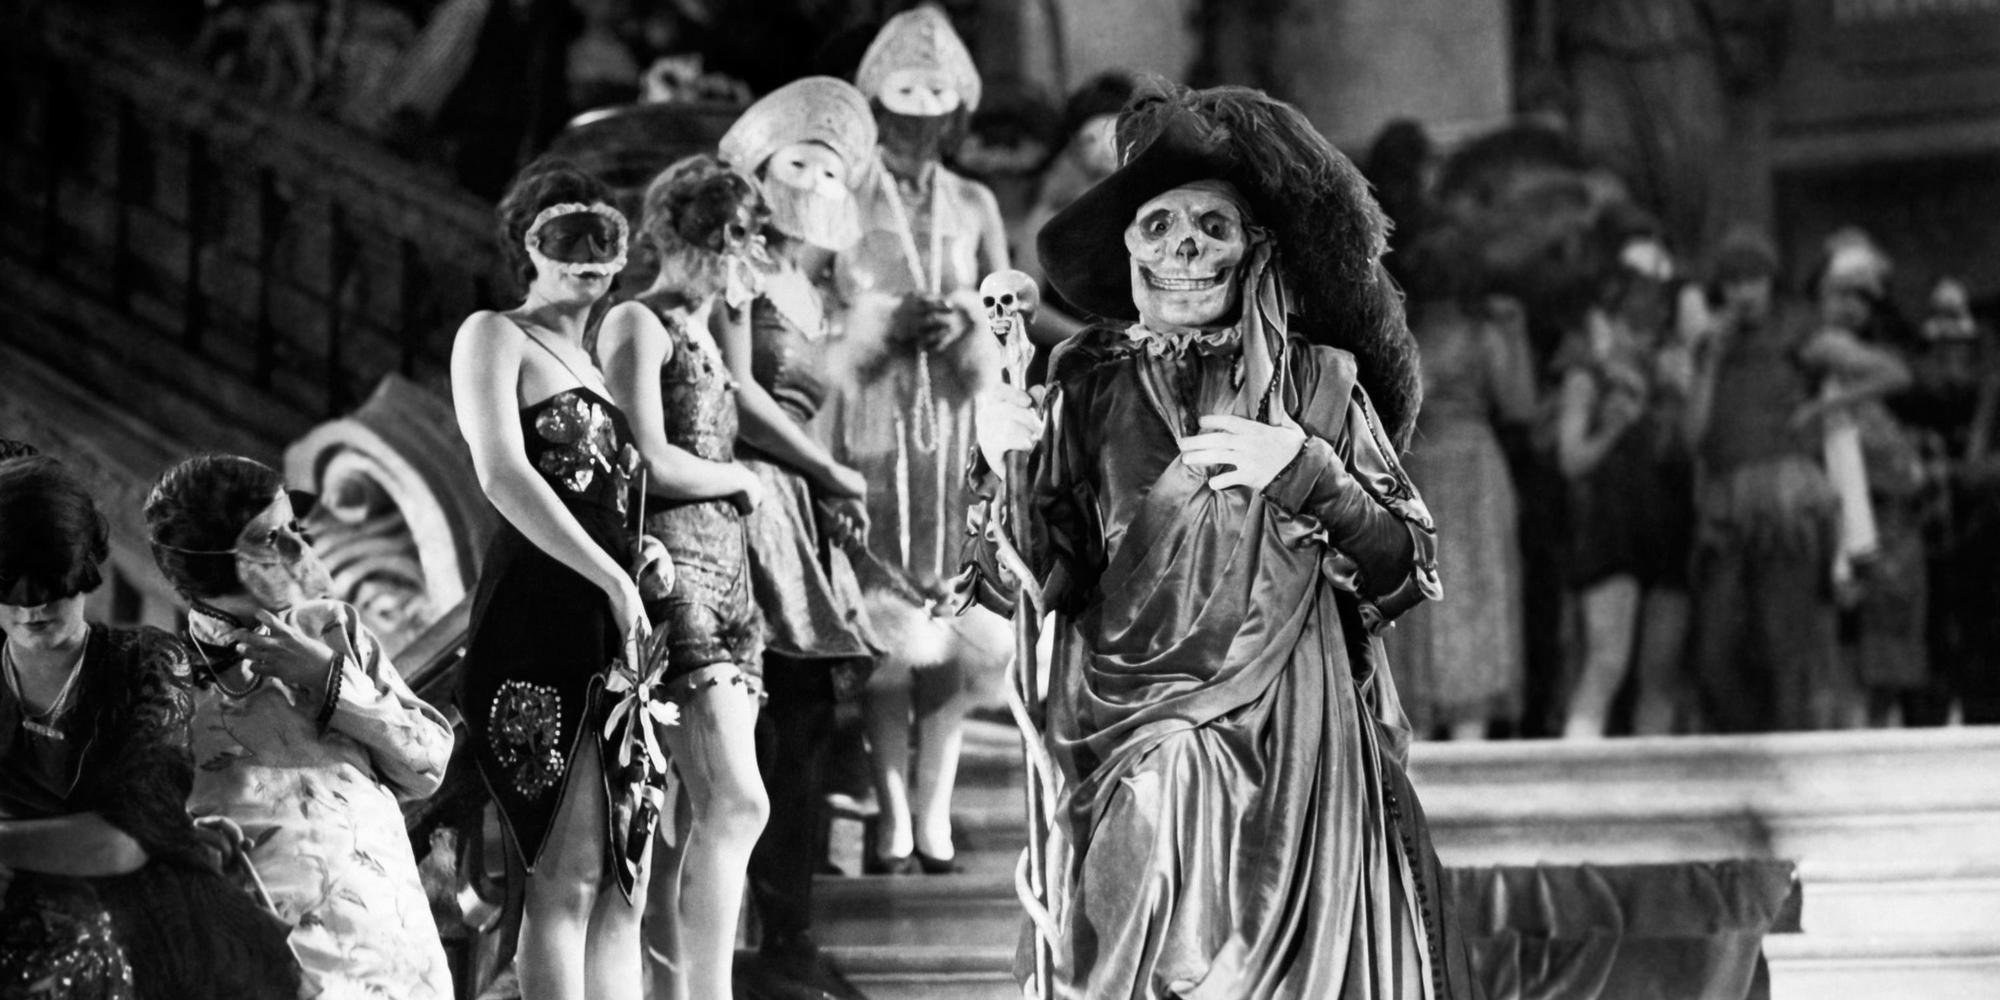 THE PHANTOM OF THE OPERA 1925 Universal Pictures film with Lon Chaney and Mary Philbin. Image shot 1925. Exact date unknown.